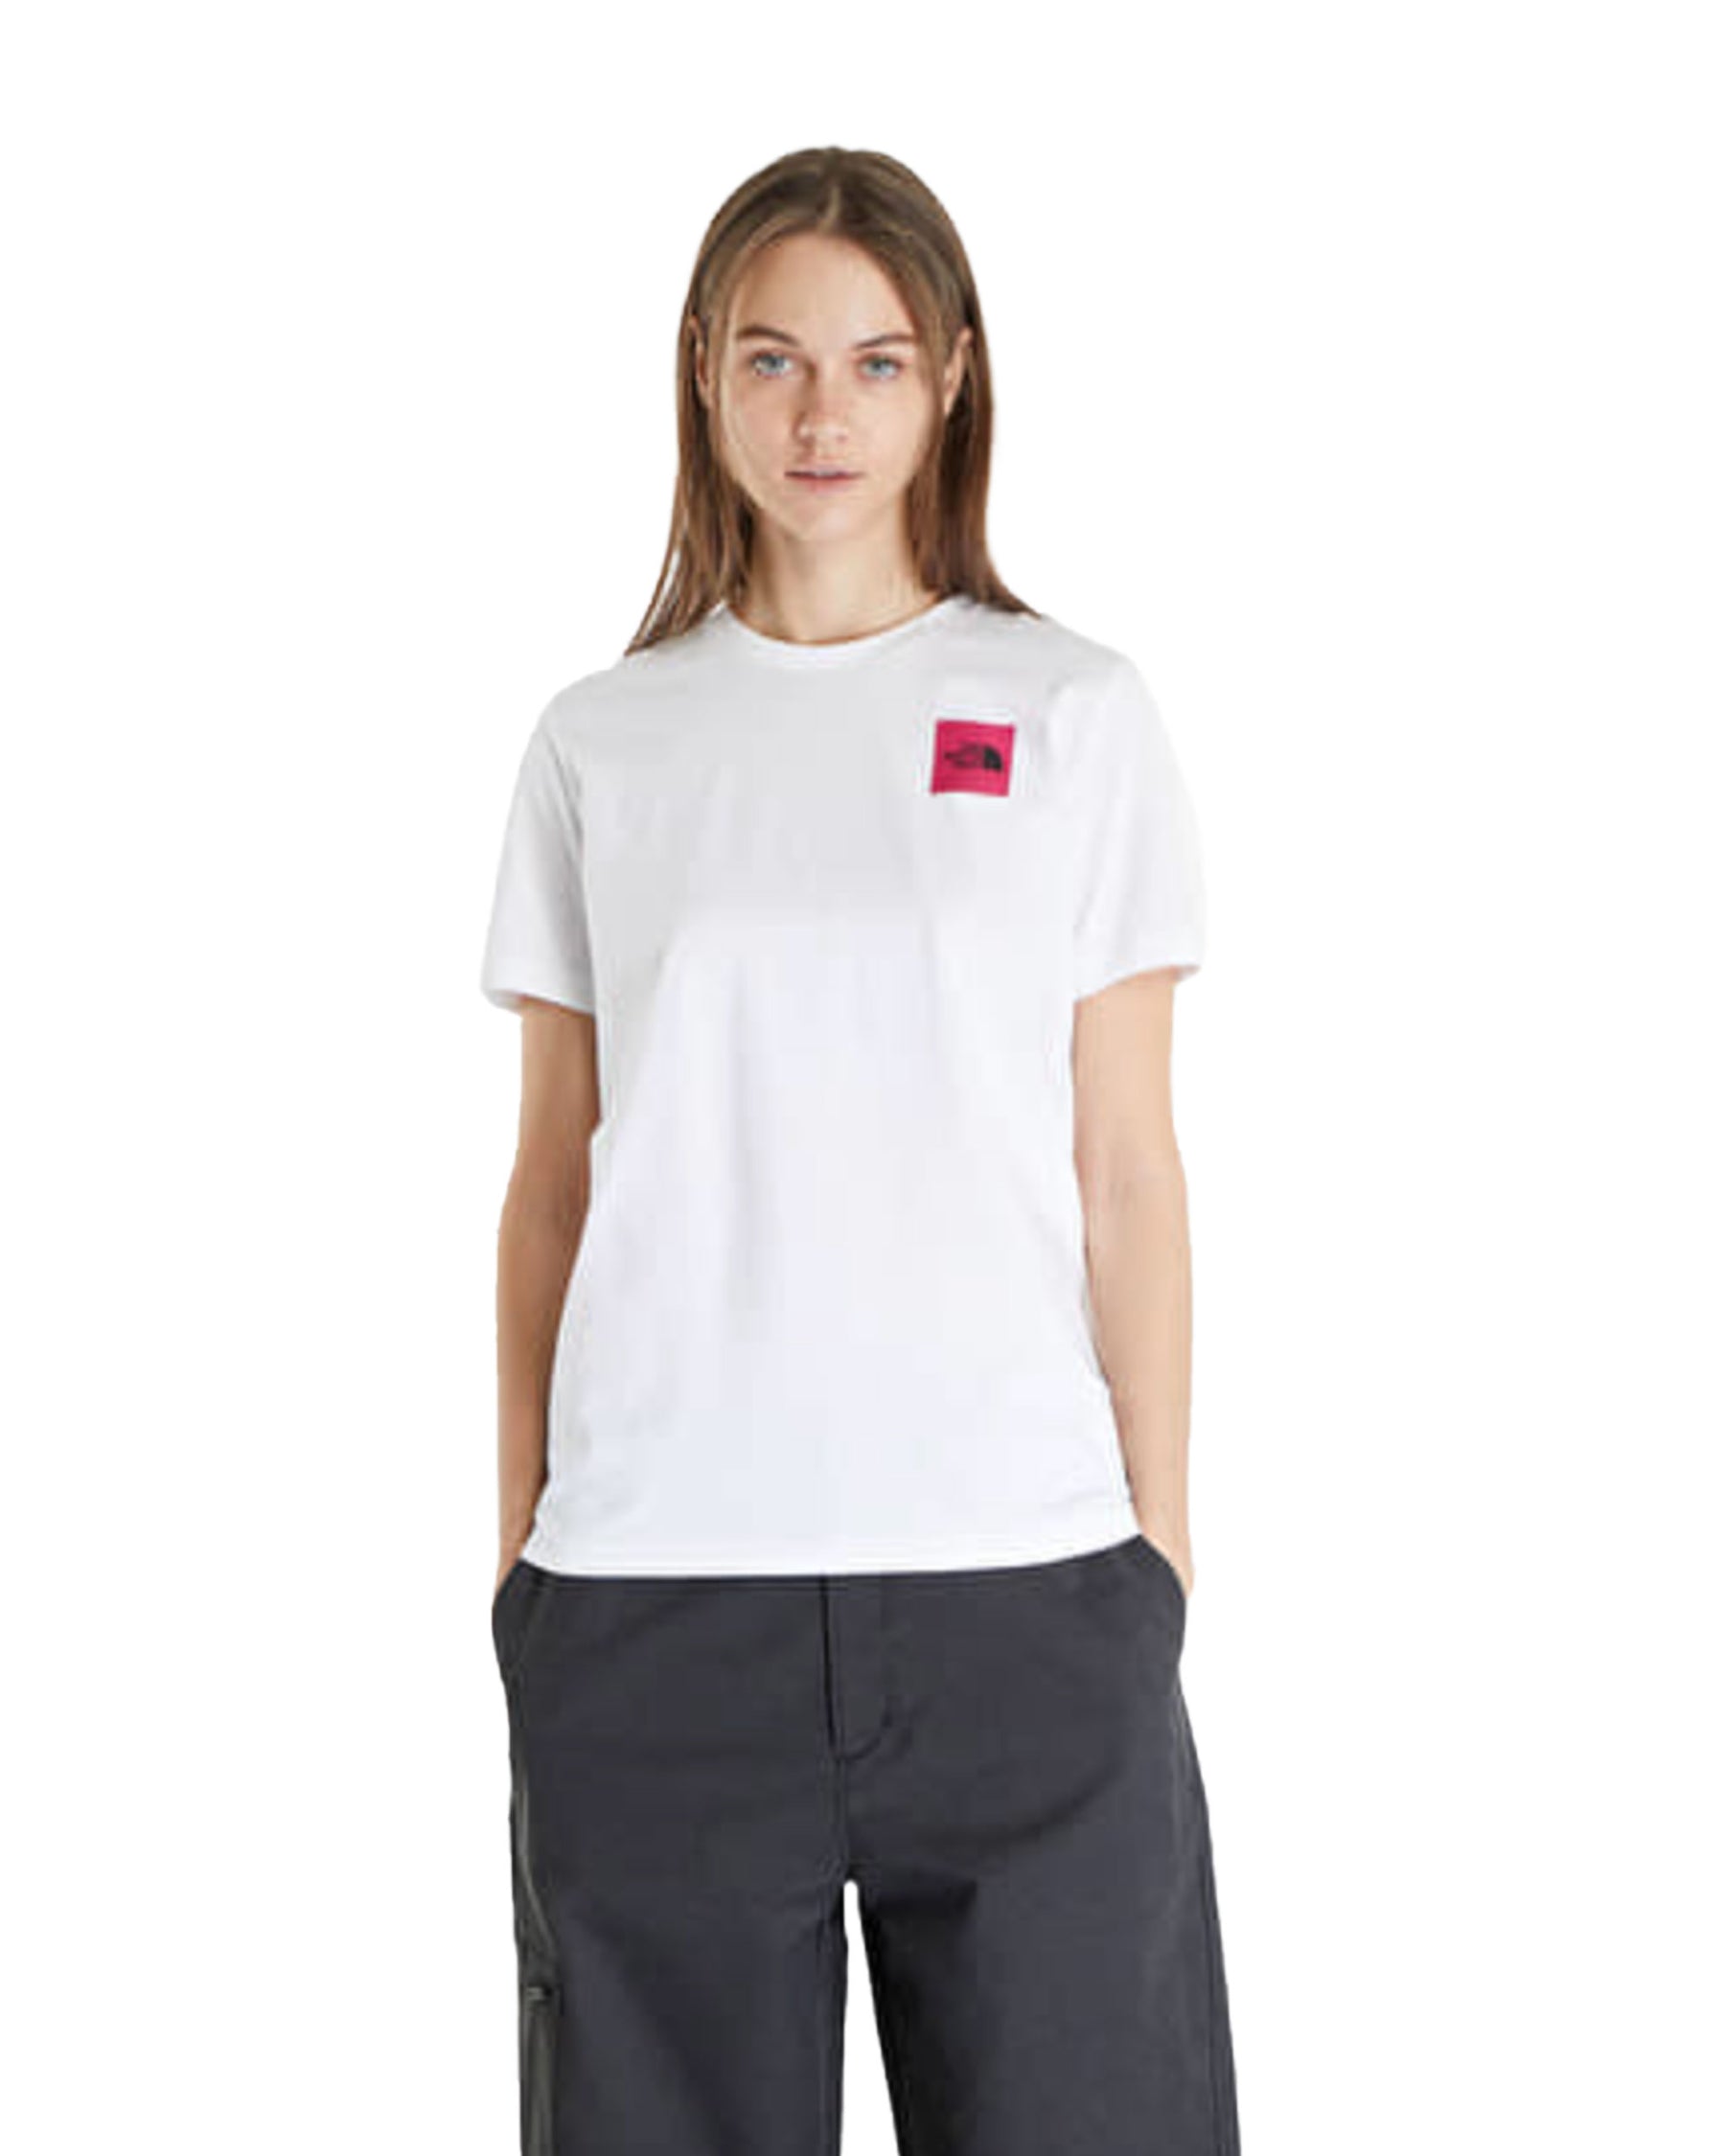 Woman's Tee The North Face Coordinate White